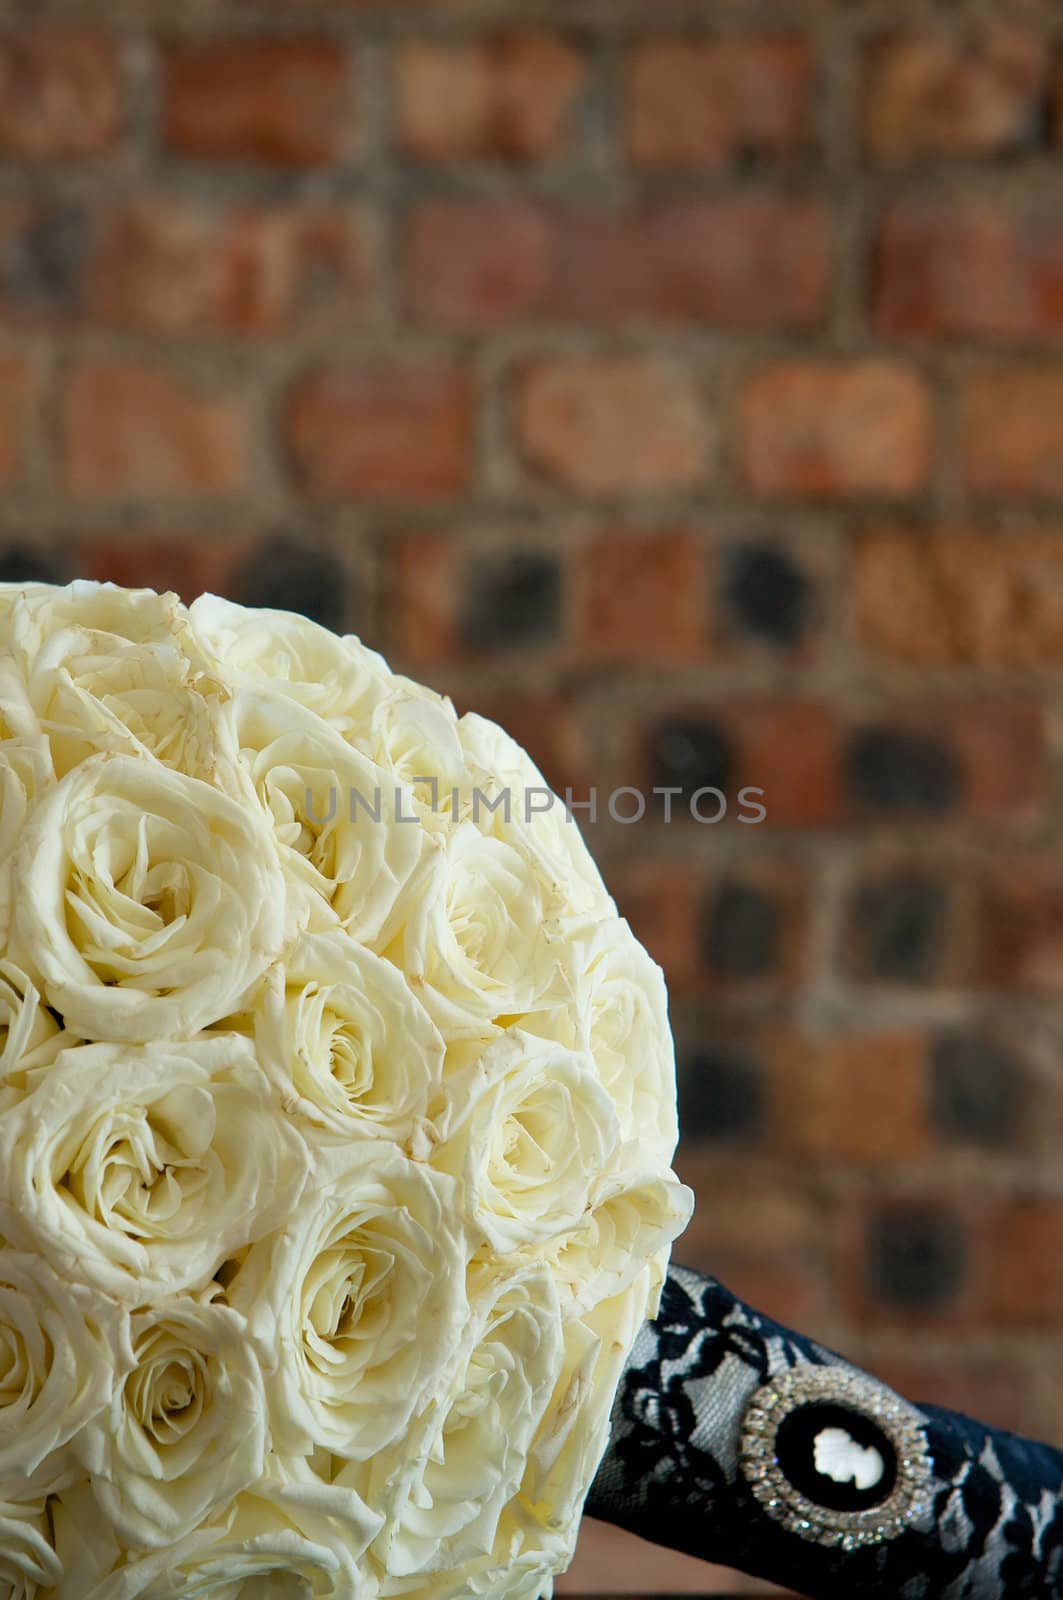 A bridal bouquet of flowers made with cream colored roses